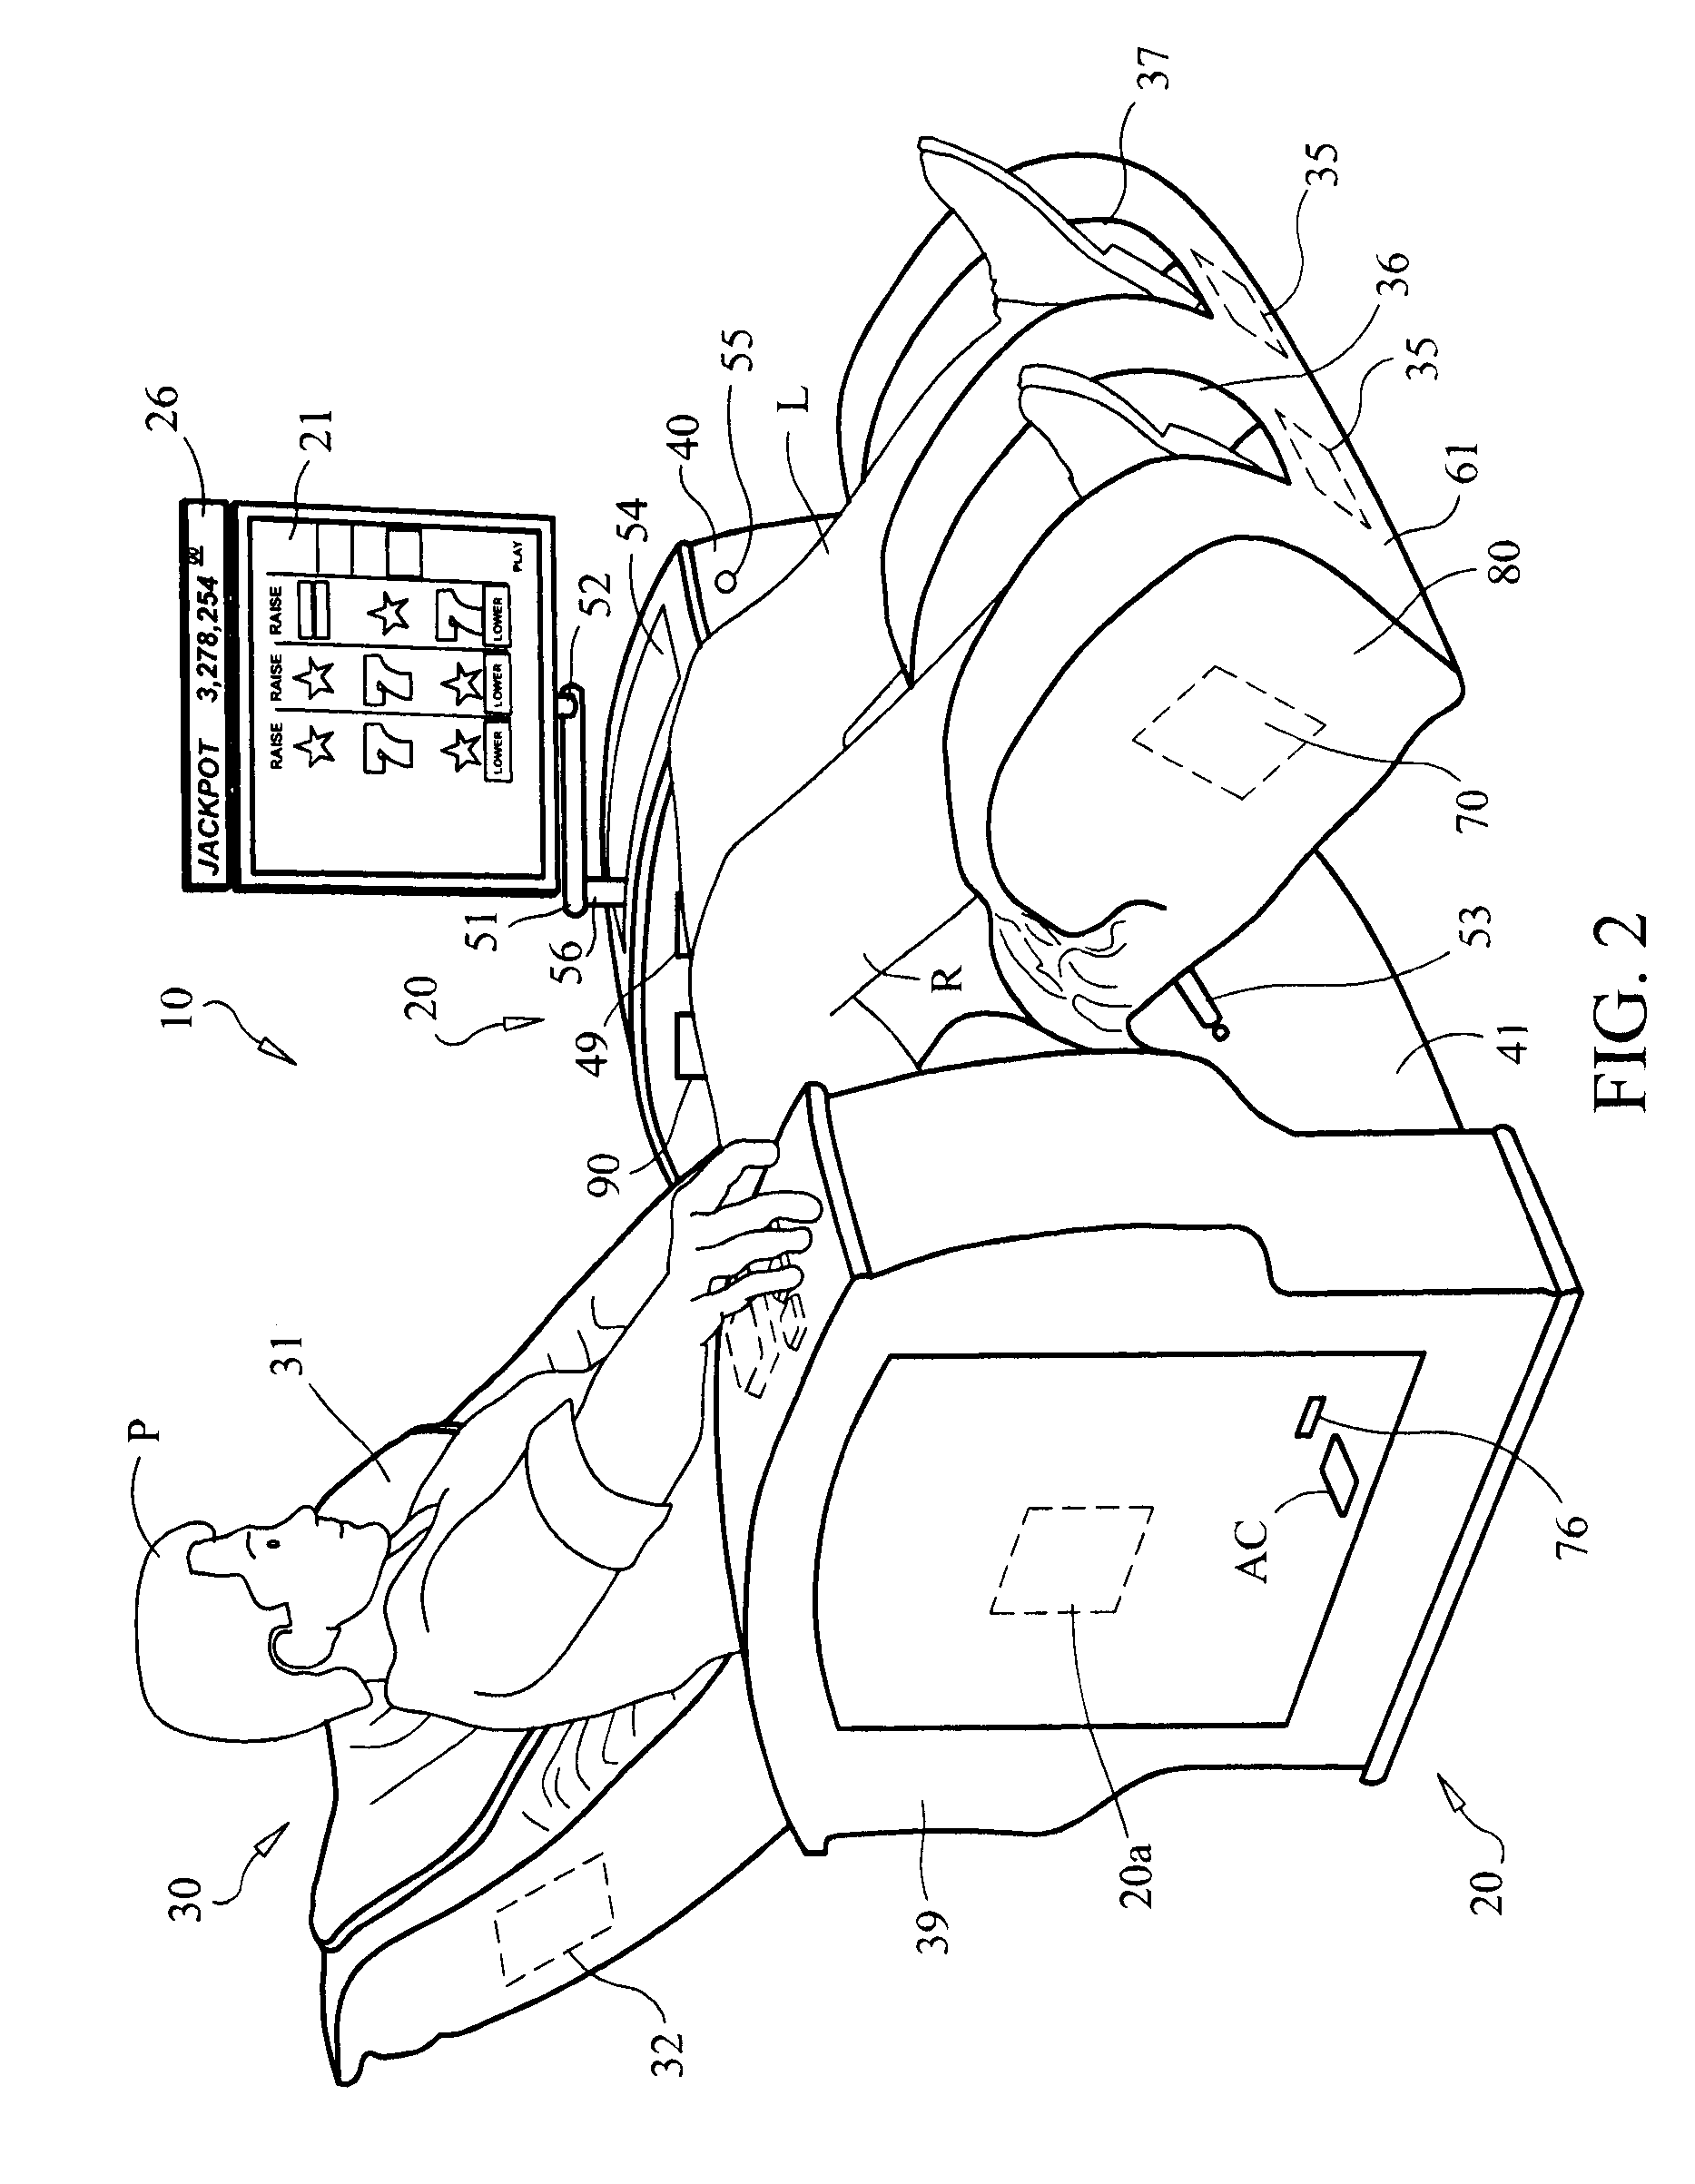 Gaming machine and method of use thereof